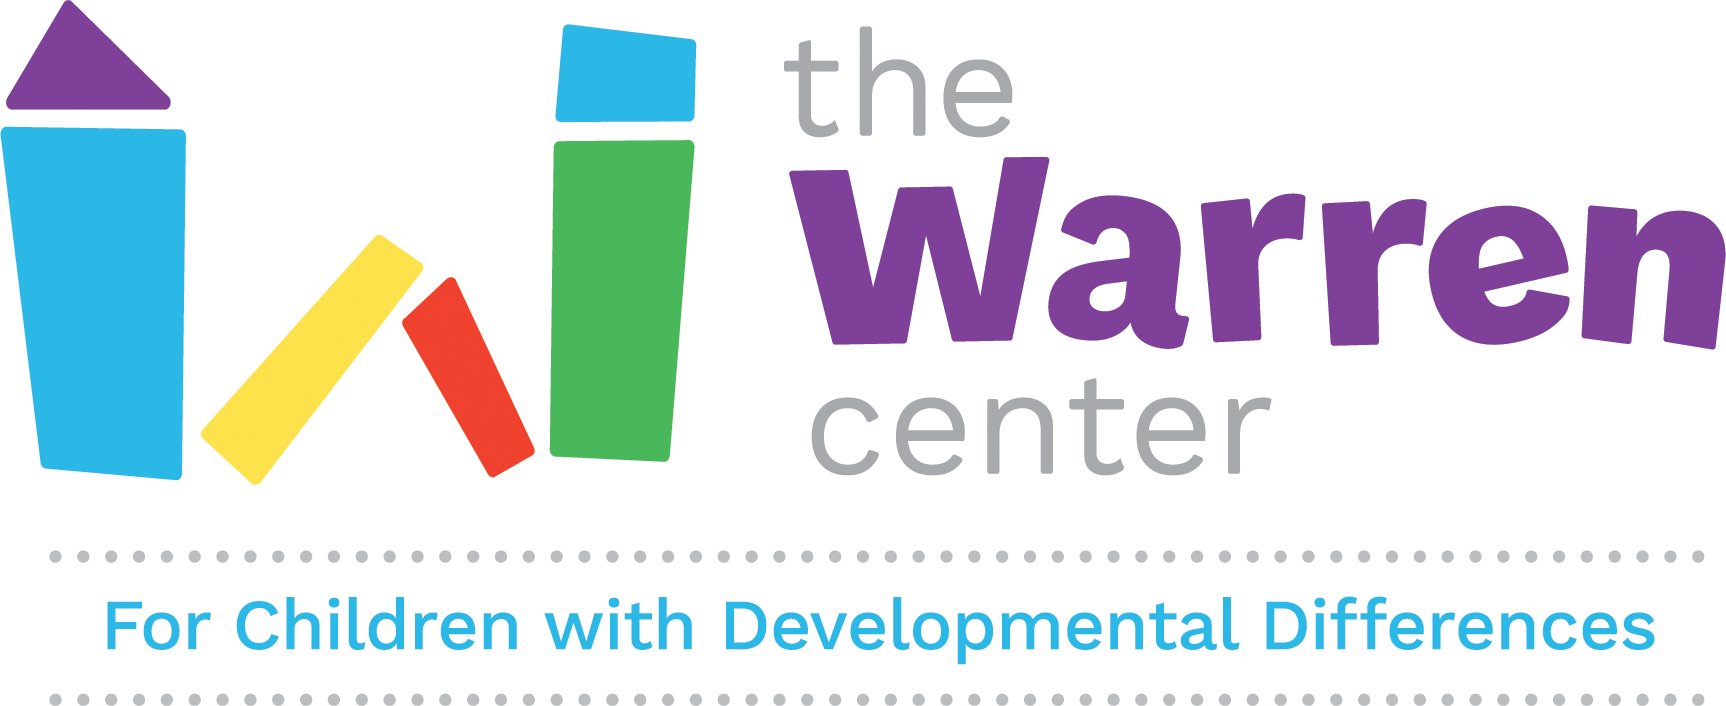 TheWarrenCenter_Primary_color_RGB.jpg